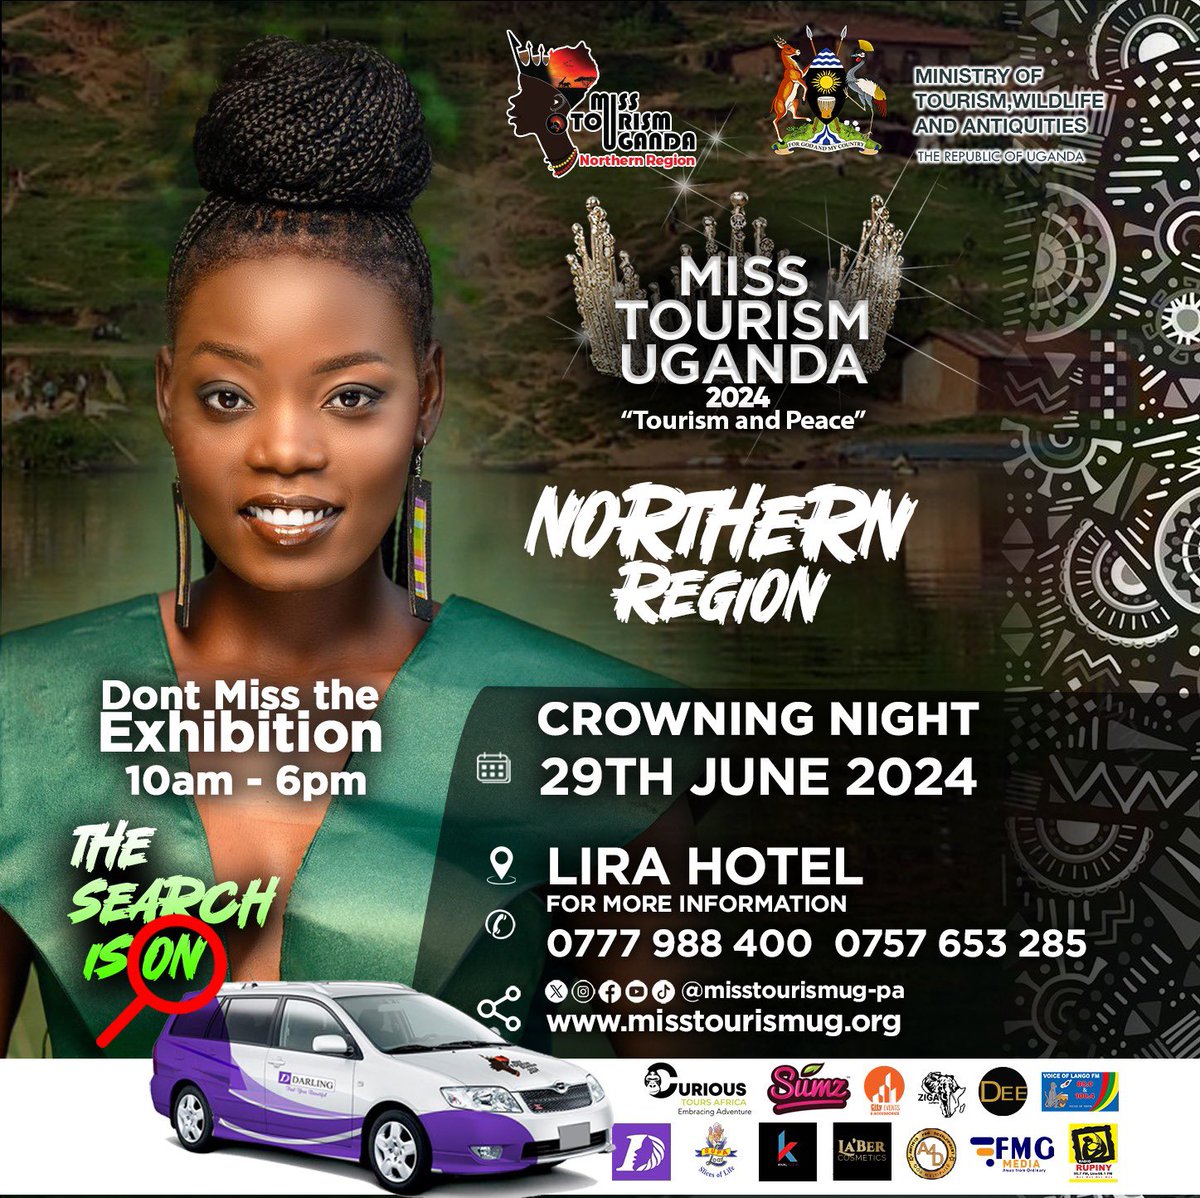 The search is on to find the next Miss Tourism Uganda Northern Region!

For more information, contact 
0777-988-400 or 0757-653-285.
@misstourismUga @MTWAUganda 

#misstourismuganda2024 #tourismandpeace #NorthernRegion #LiraHotel #CrowningNight  #UgandaTourism  #Culture  #beauty